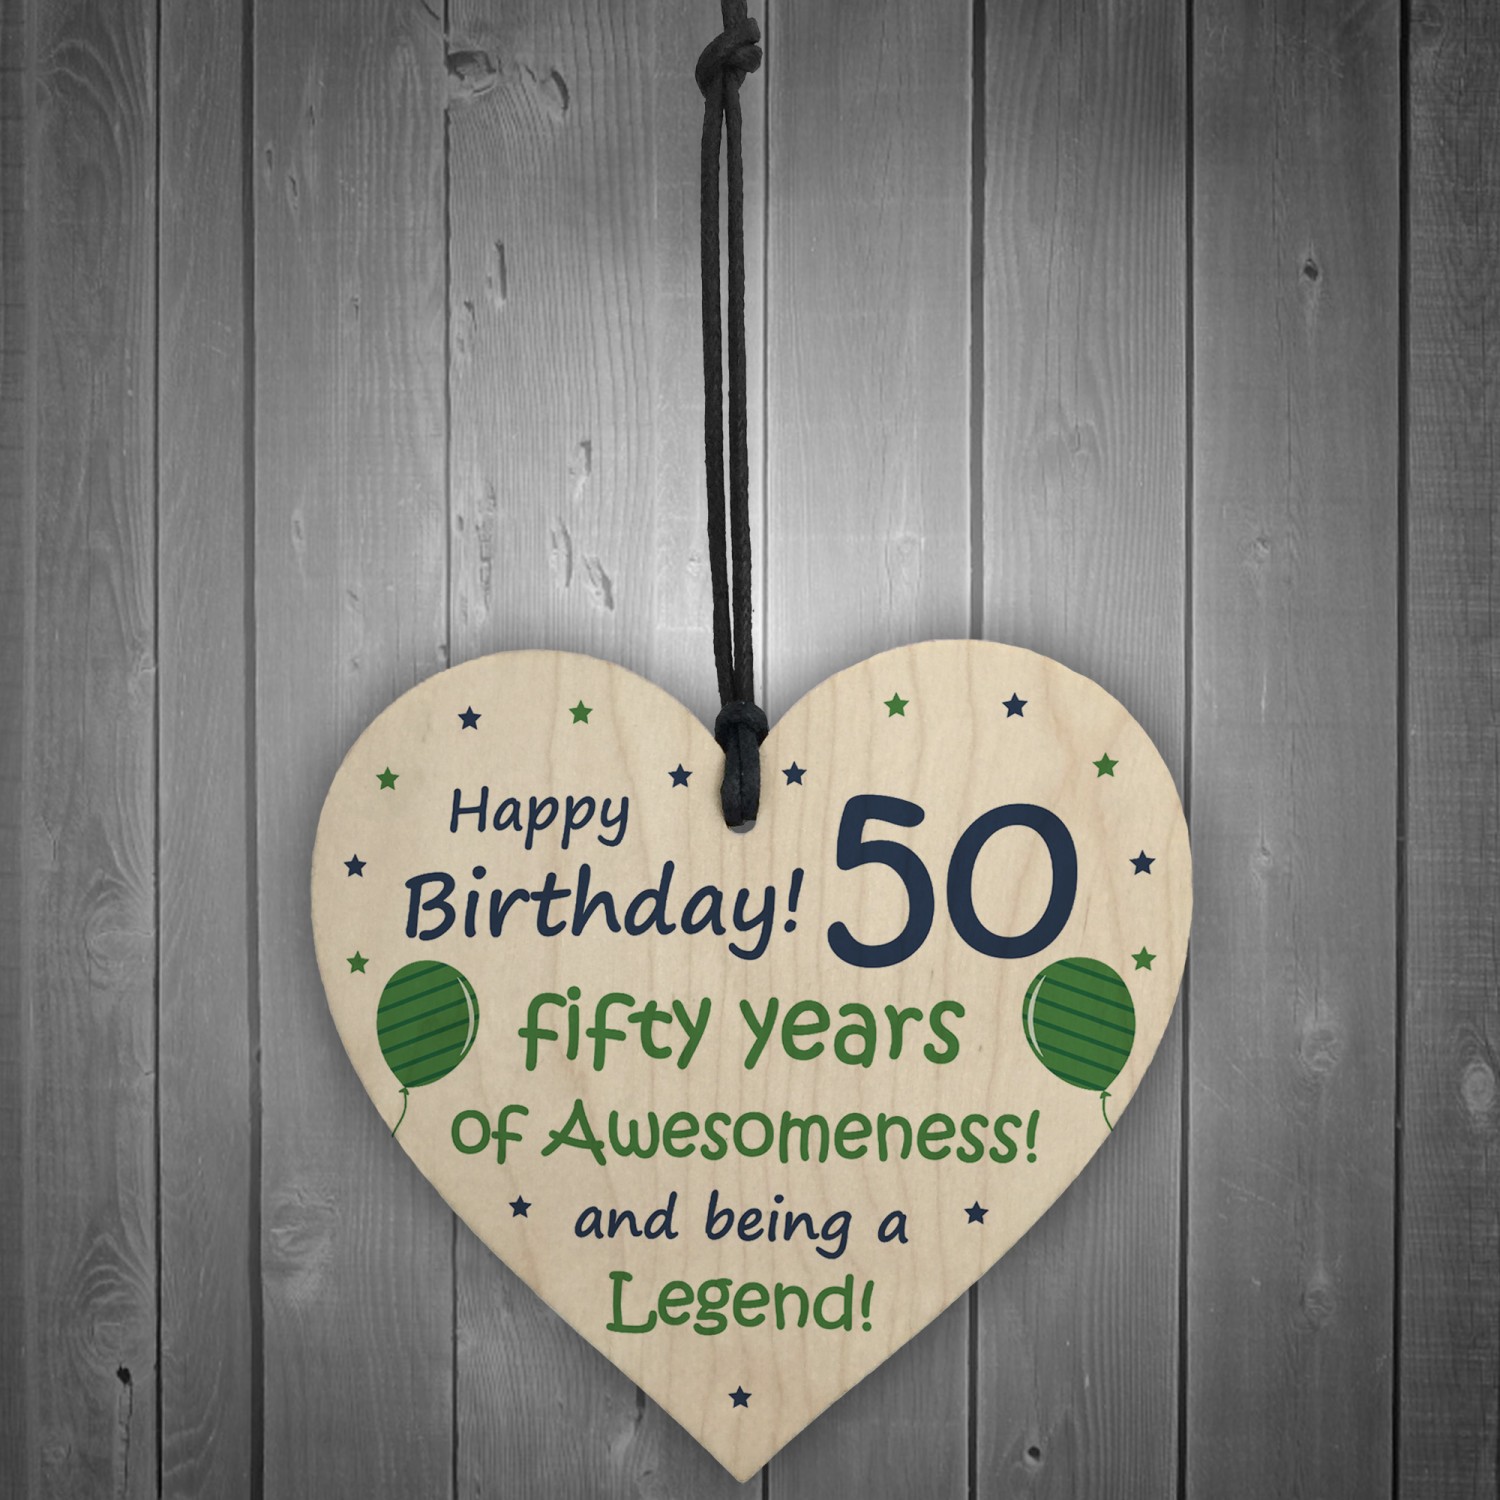 50th Birthday Gifts For Women 50th Birthday Gifts For Men Wooden